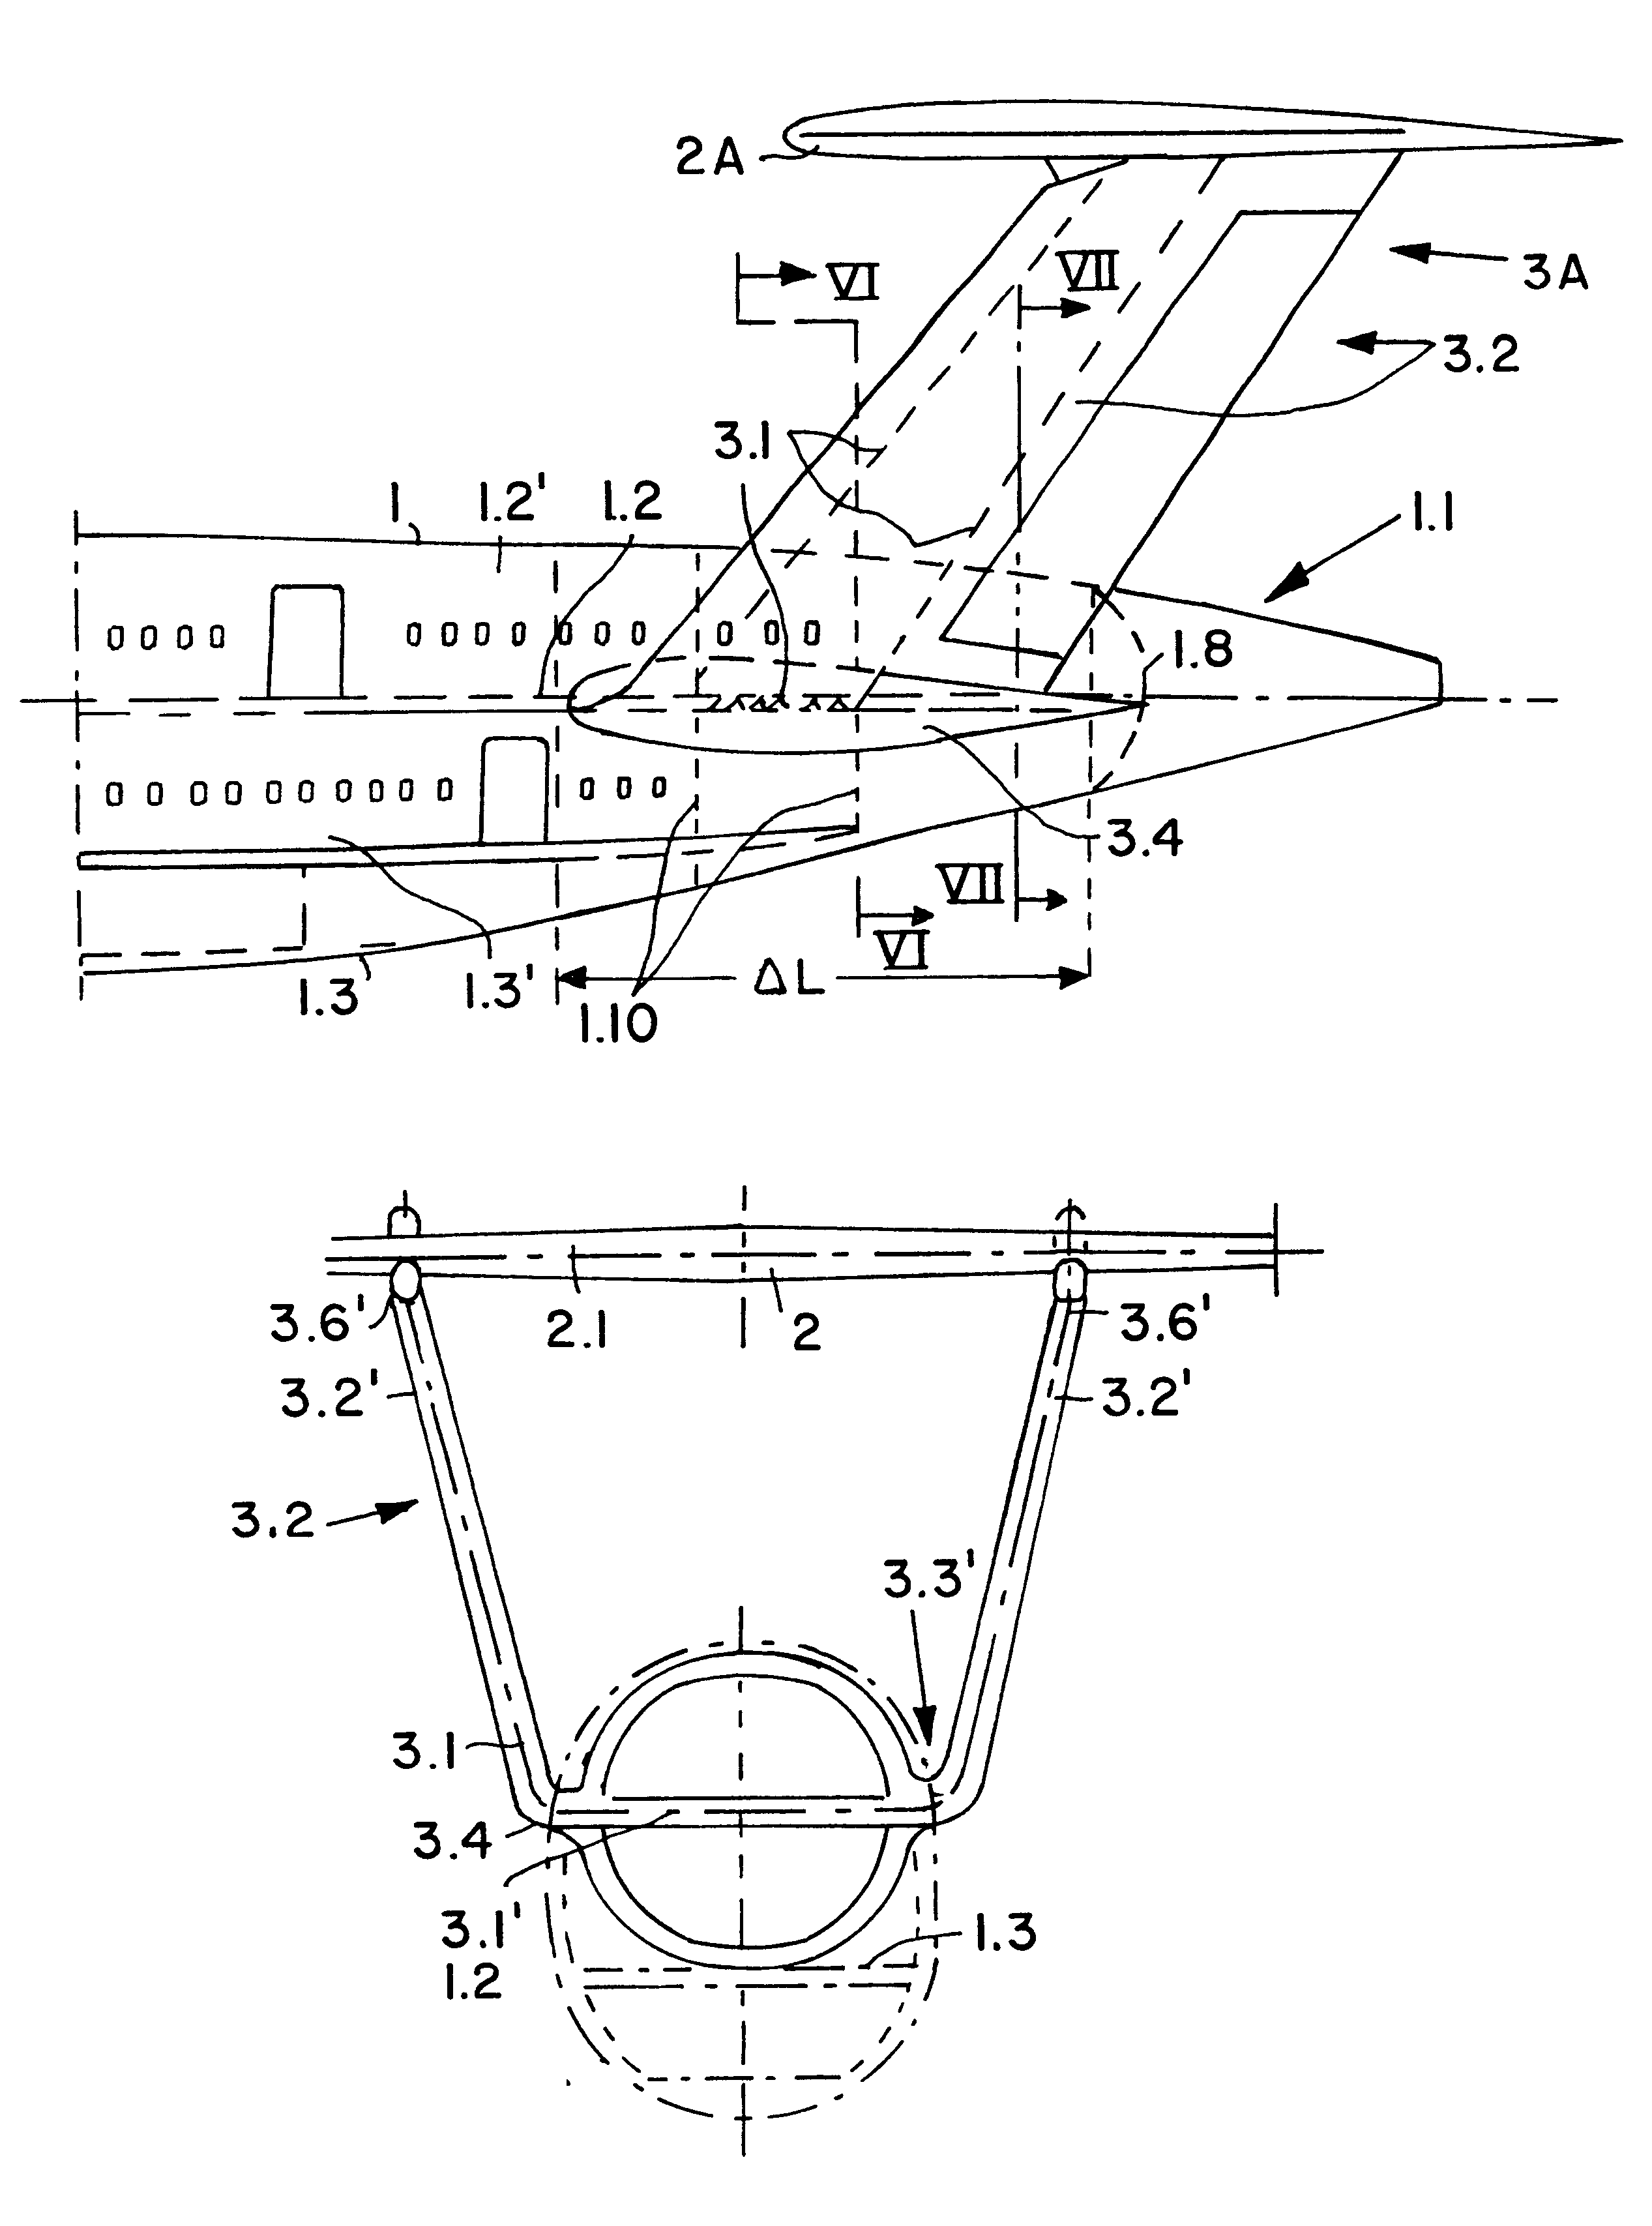 Aircraft with a double-T tail assembly